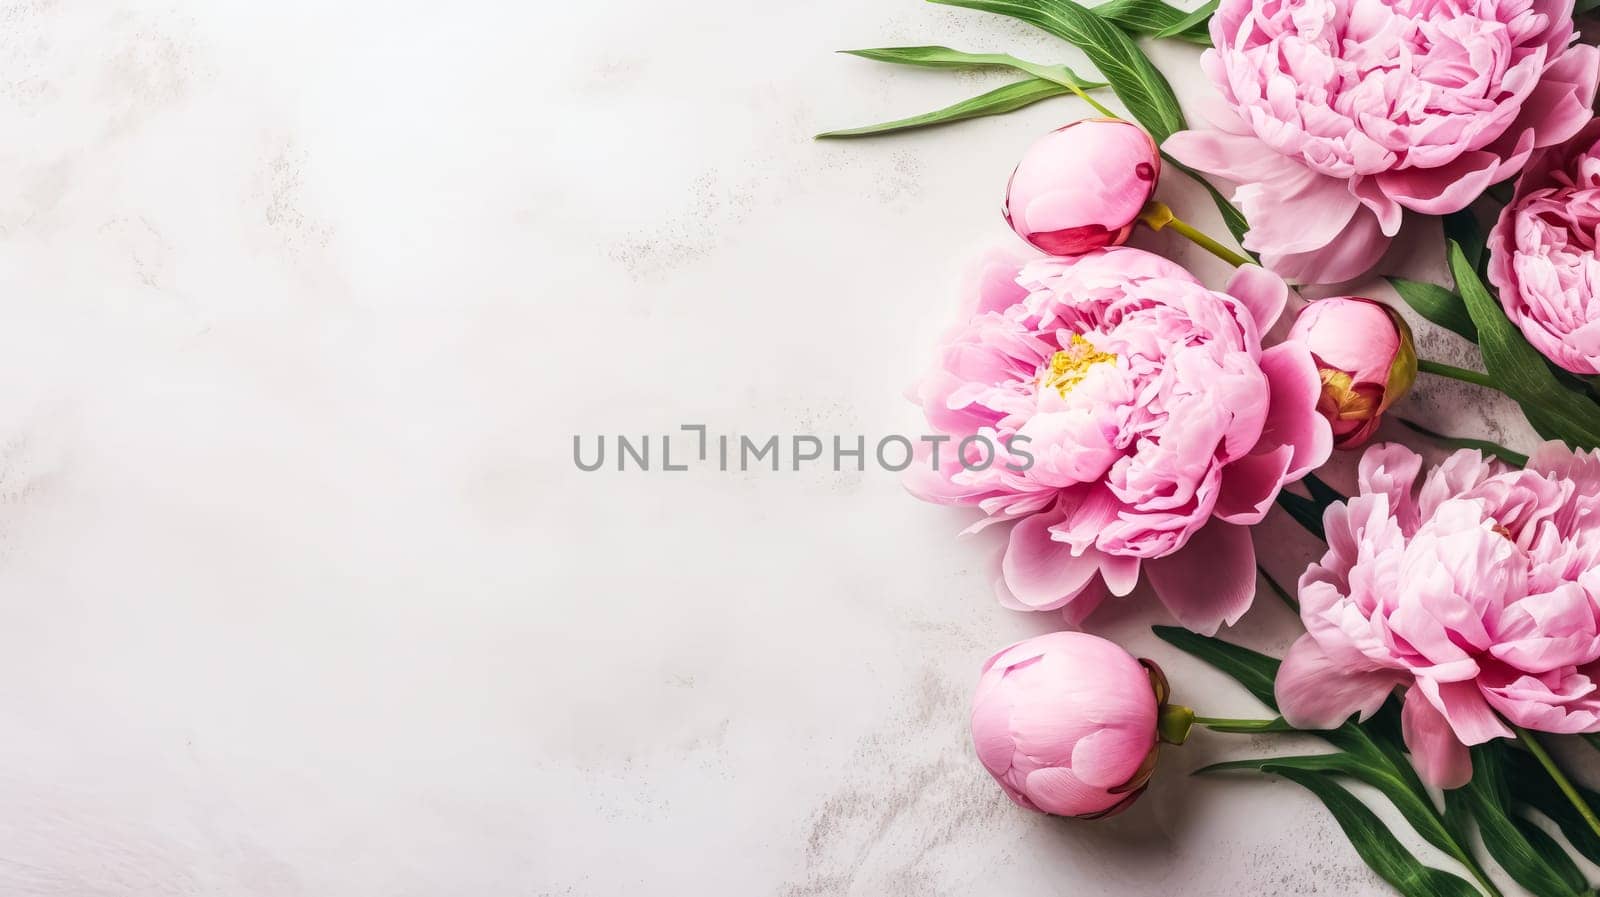 Elegant pink peonies gracefully isolated on a chic gray background, providing a visually stunning composition with ample copy space.